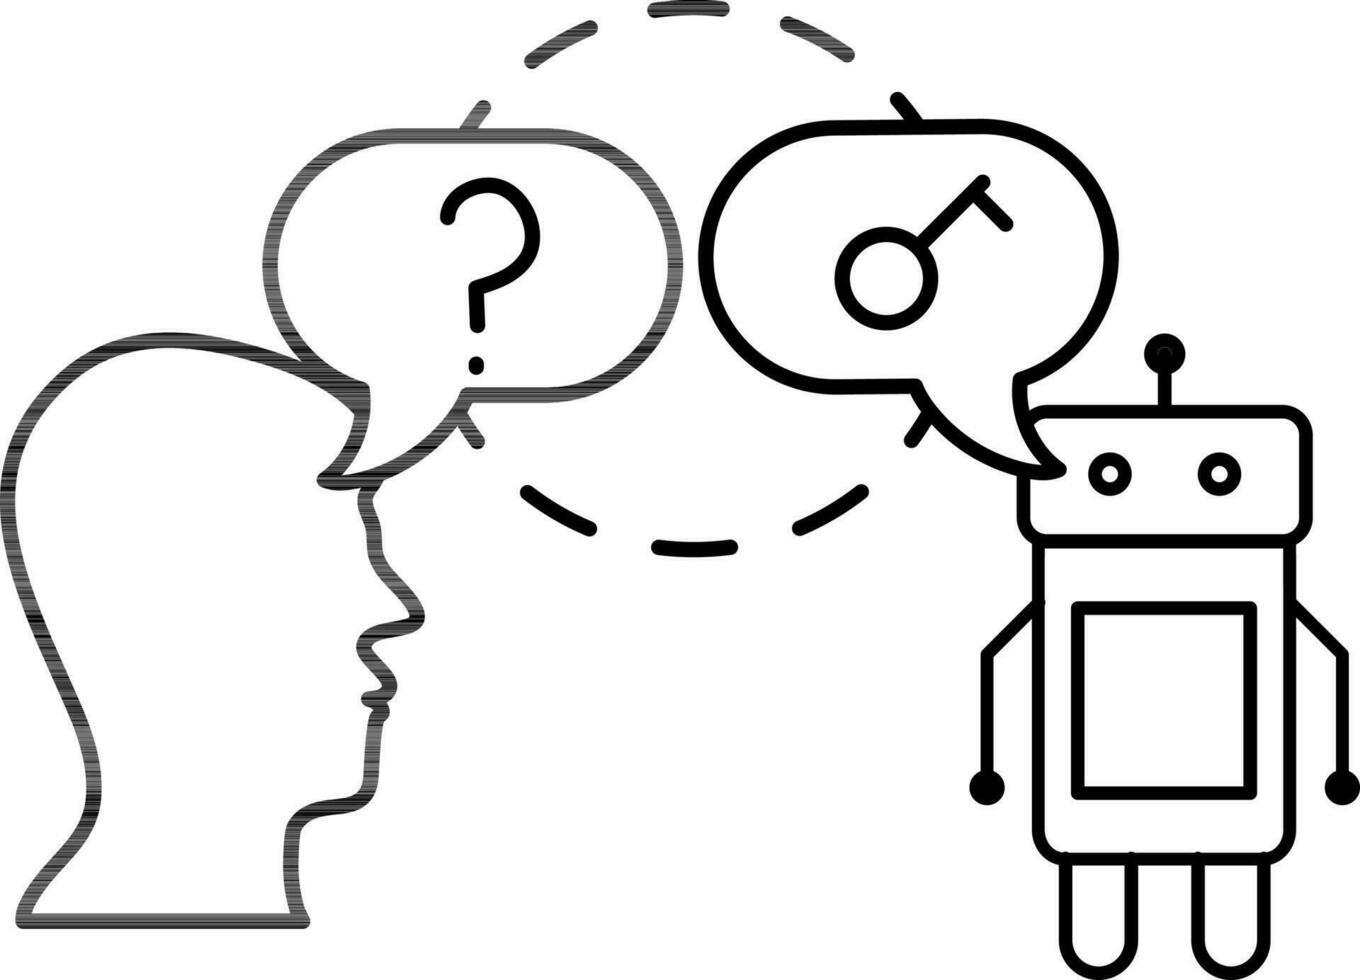 Black line art illustration of Man speak question of key with robot icon. vector